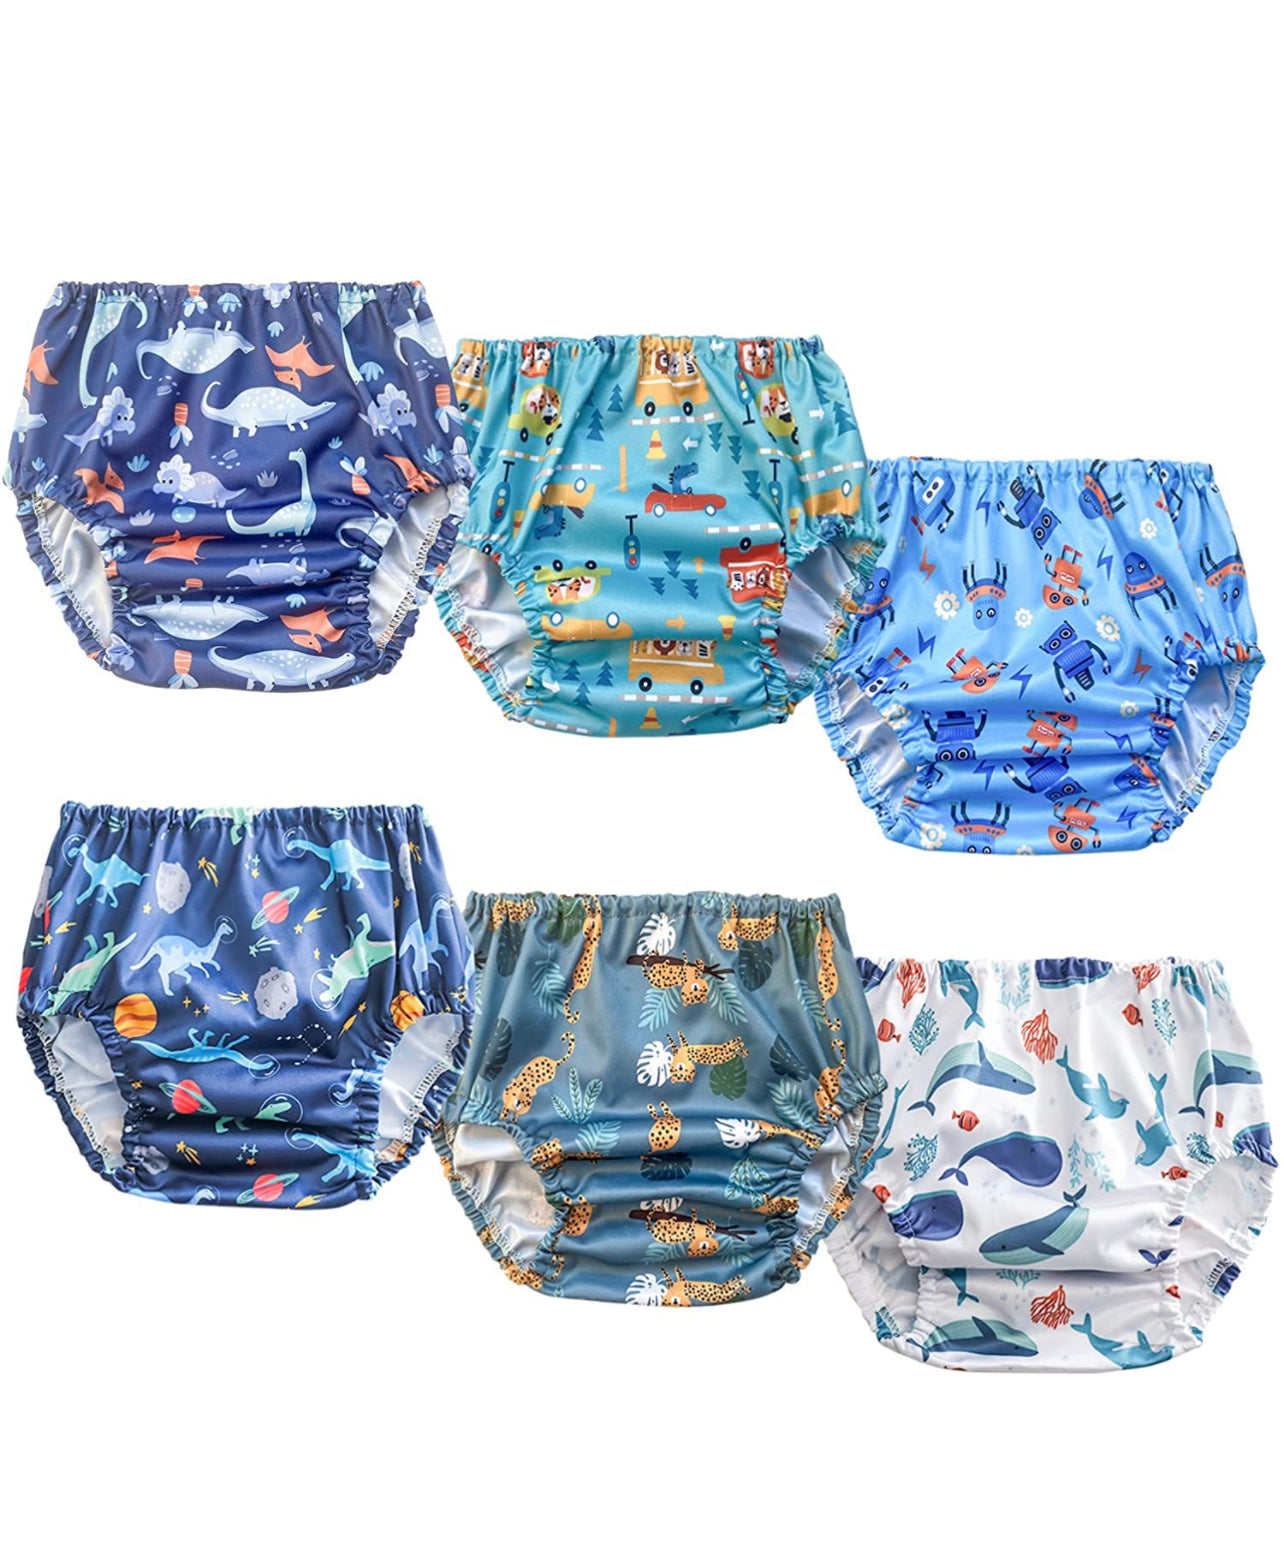 Wholesale Rubber Training Pants for Toddlers Plastic Underwear